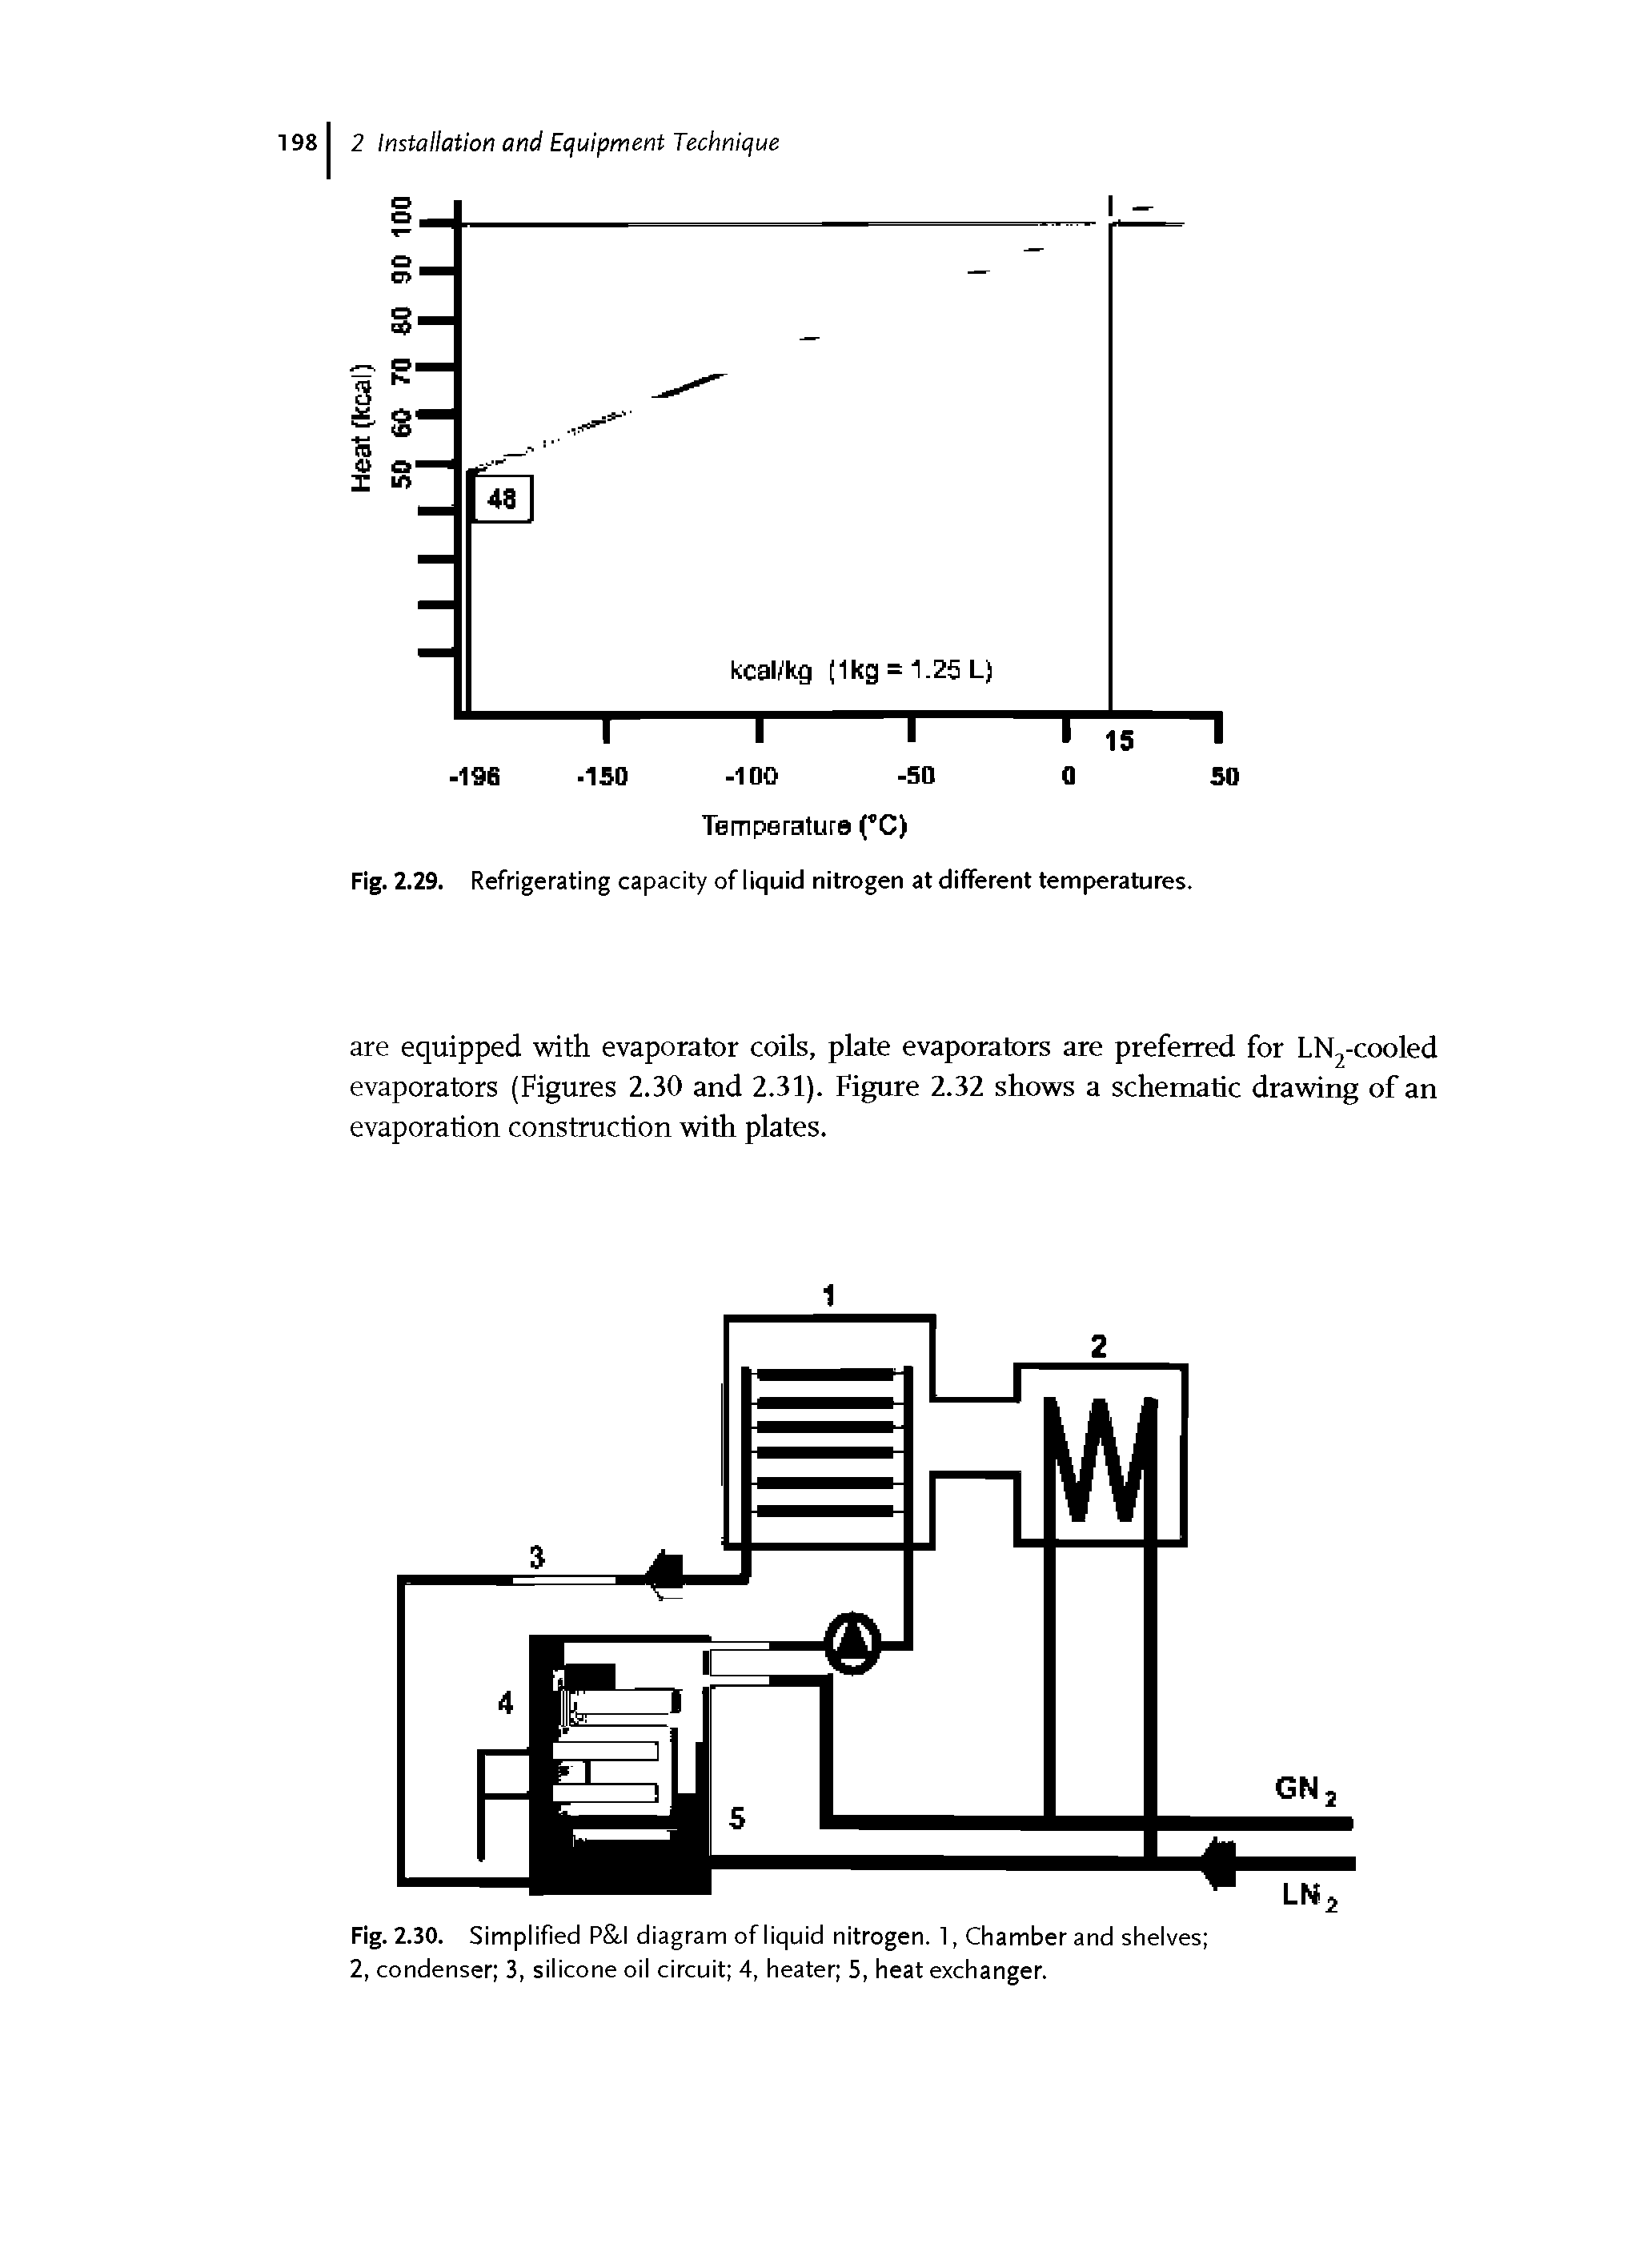 Fig. 2.30. Simplified P. I diagram of liquid nitrogen. 1, Chamber and shelves 2, condenser 3, silicone oil circuit 4, heater 5, heat exchanger.